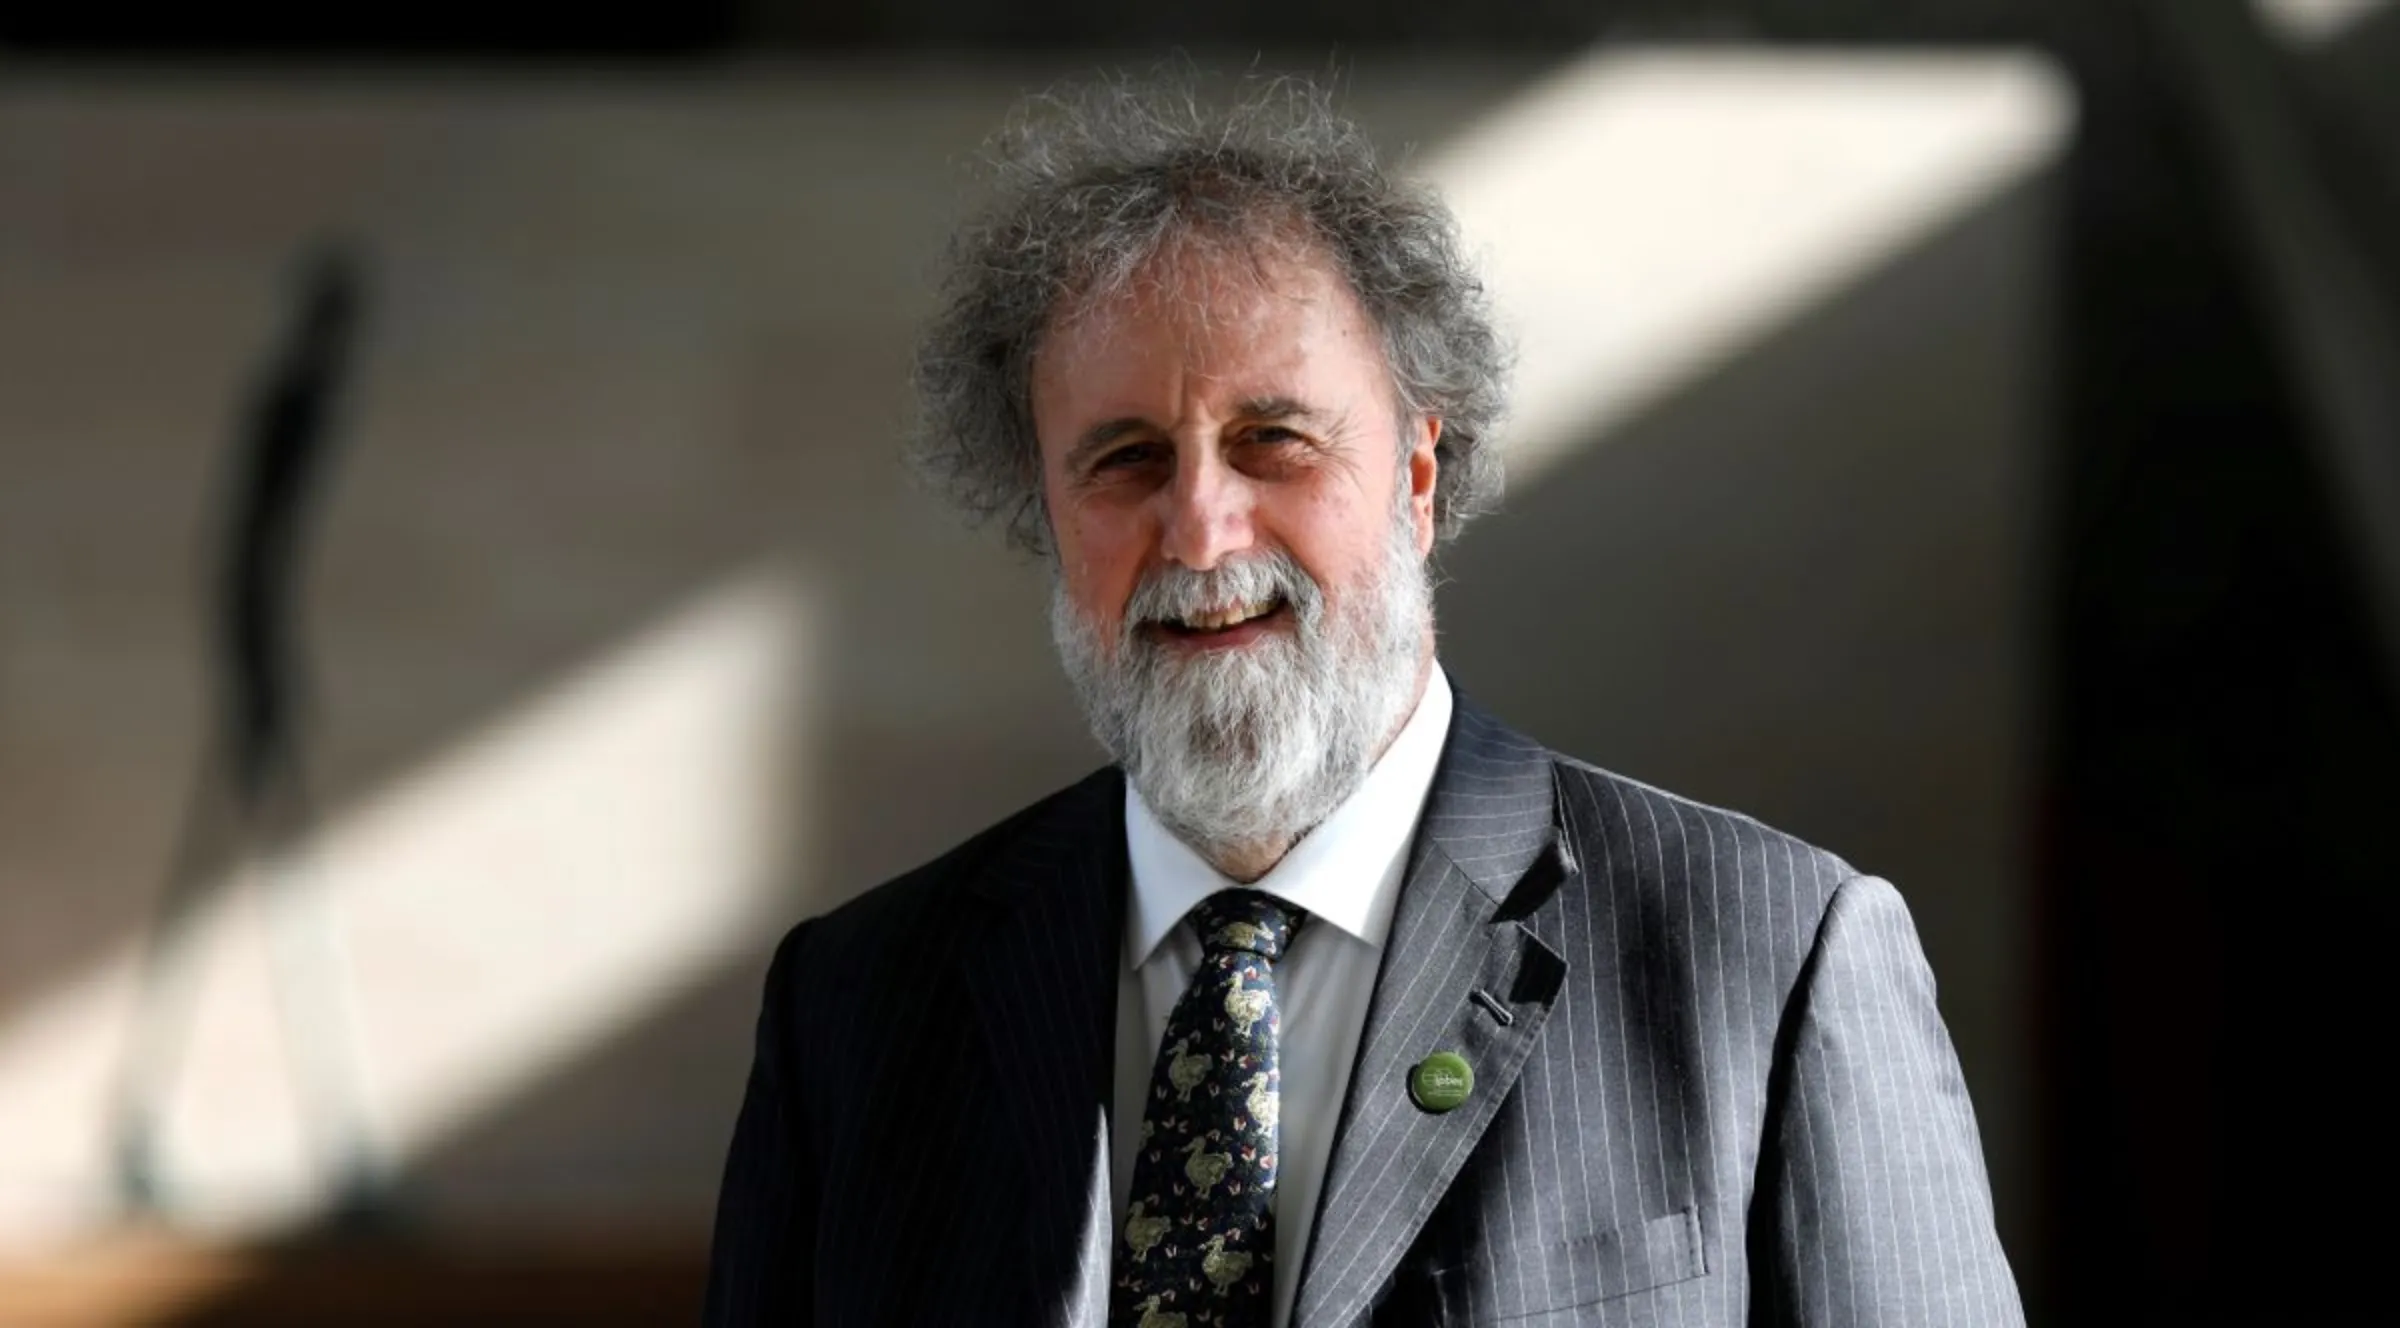 Sir Robert Watson, a British environmental scientist who chairs the IPBES (Intergovernmental Science-Policy Platform on Biodiversity and Ecosystem Services), poses during an interview in Paris, France, May 5, 2019. REUTERS/Charles Platiau